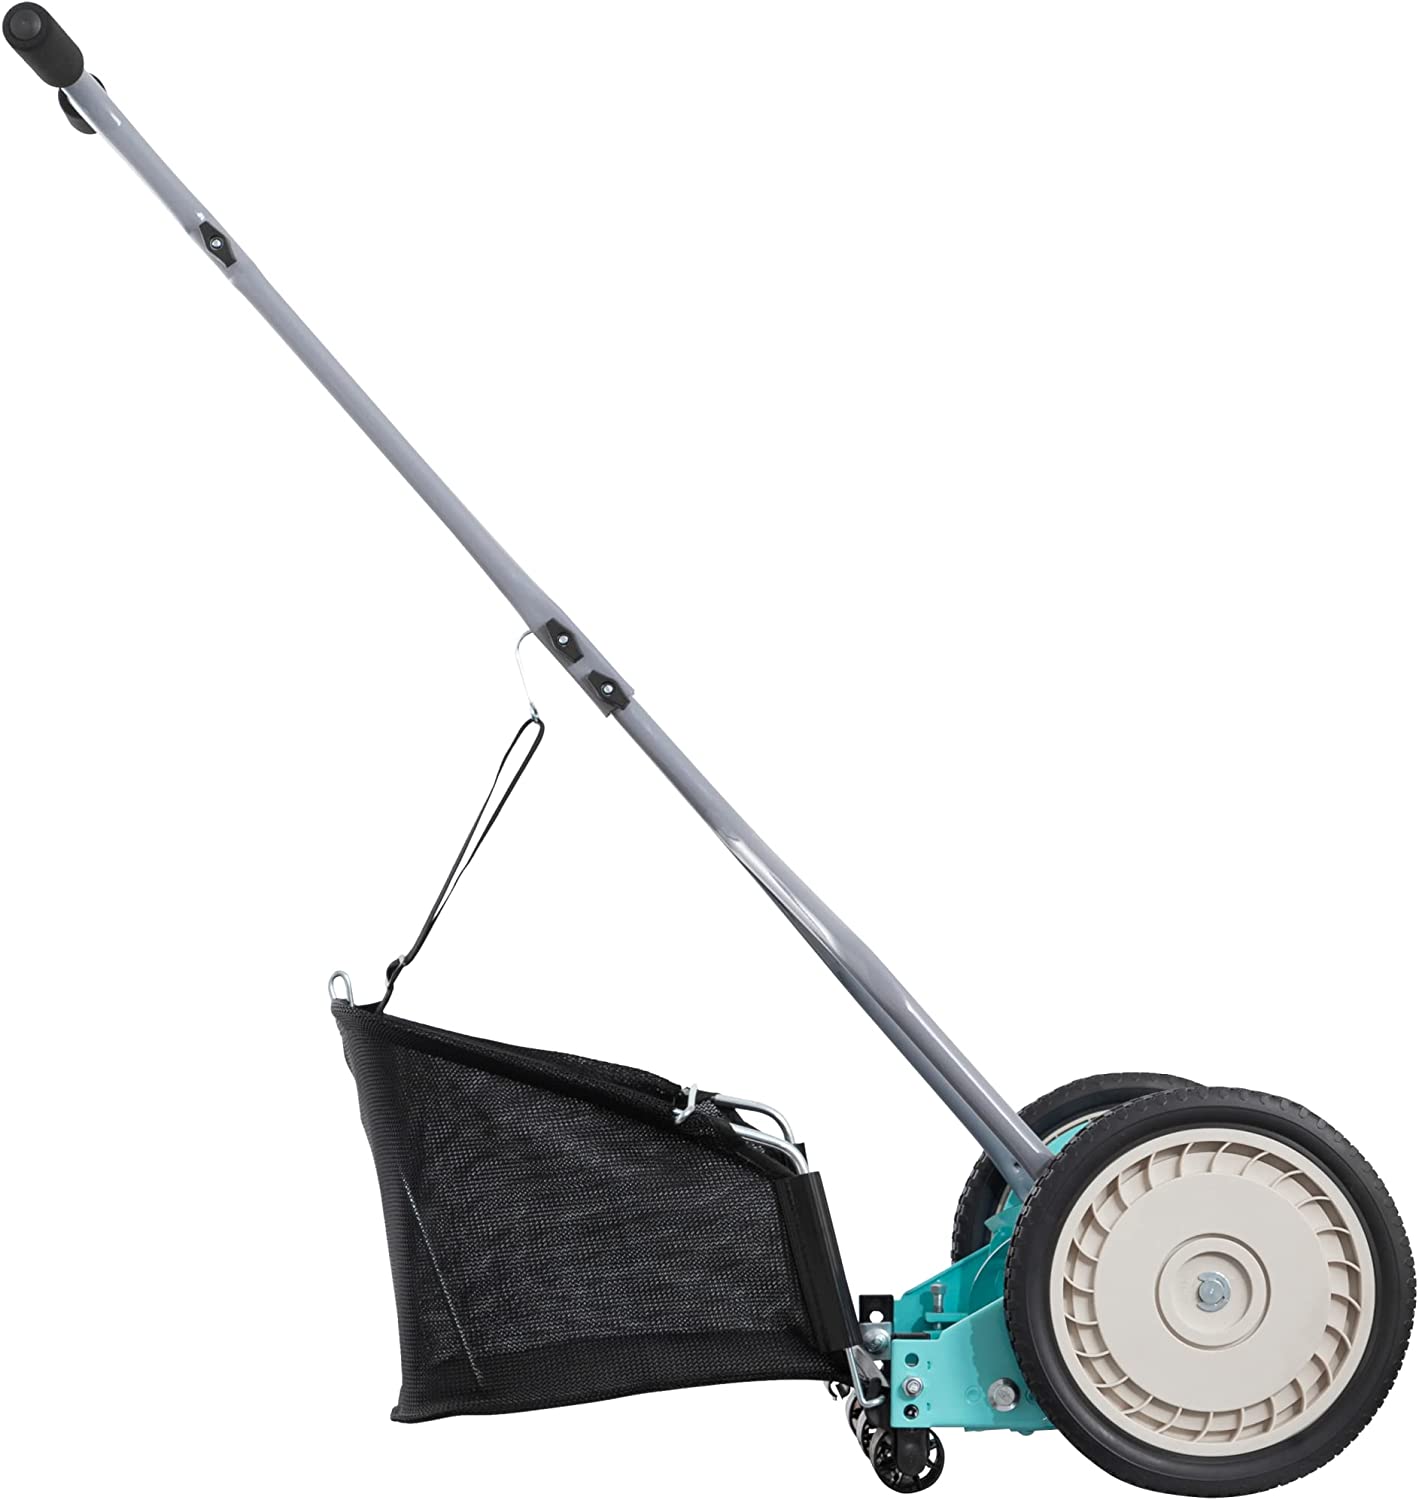 American Lawn Mower Company 1304-14GC 14-Inch 5-Blade Push Reel Lawn Mower with Grass Catcher， Mint